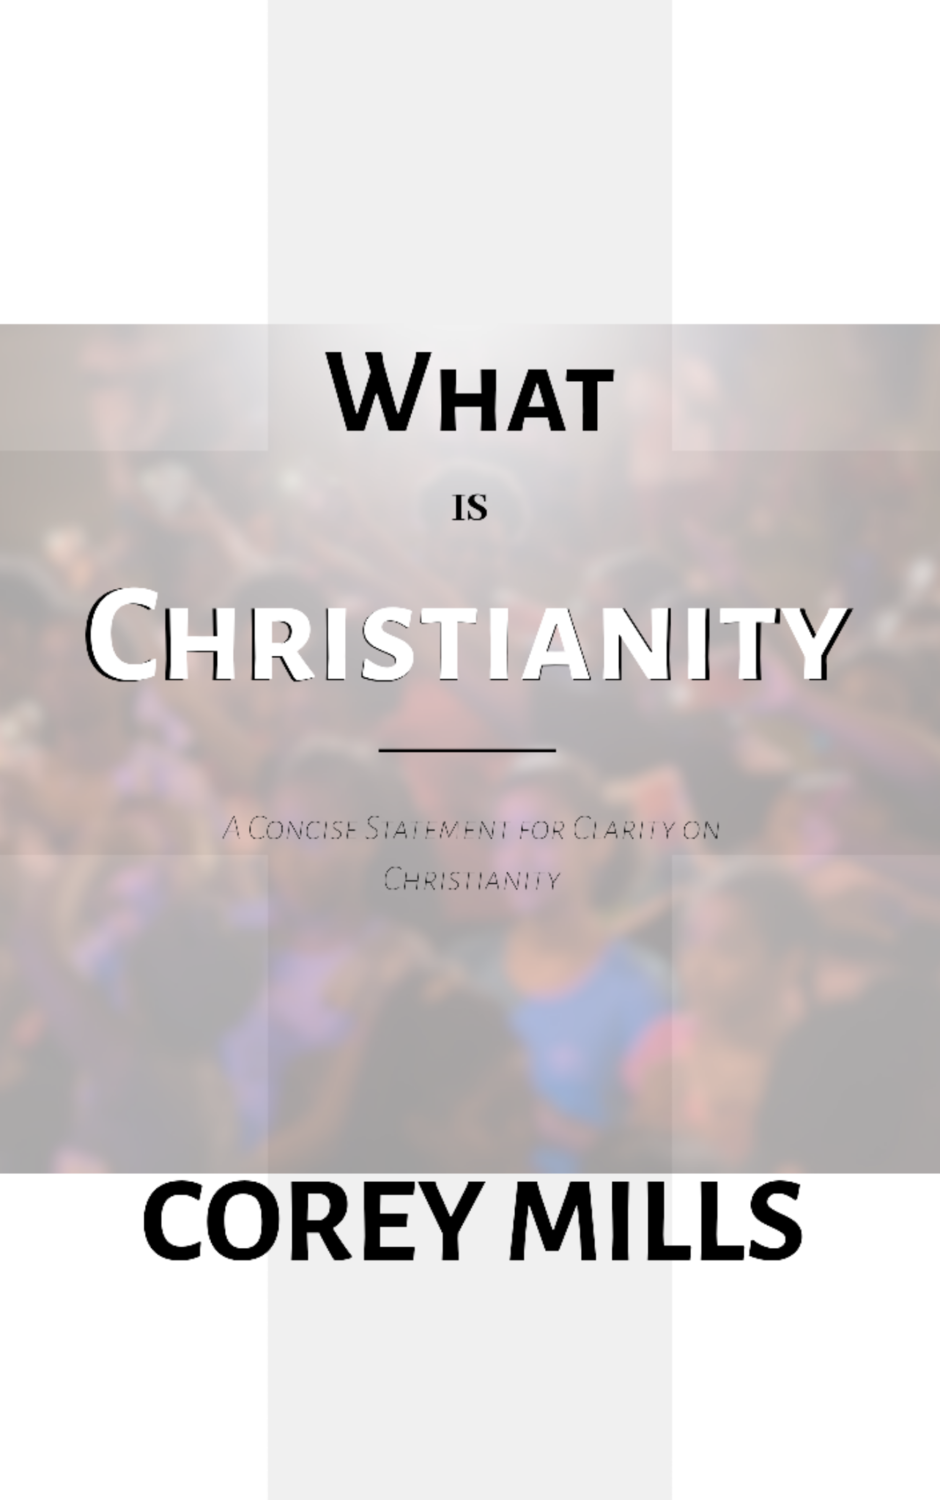 What is Christianity: A Concise Statement for Clarity on Christianity